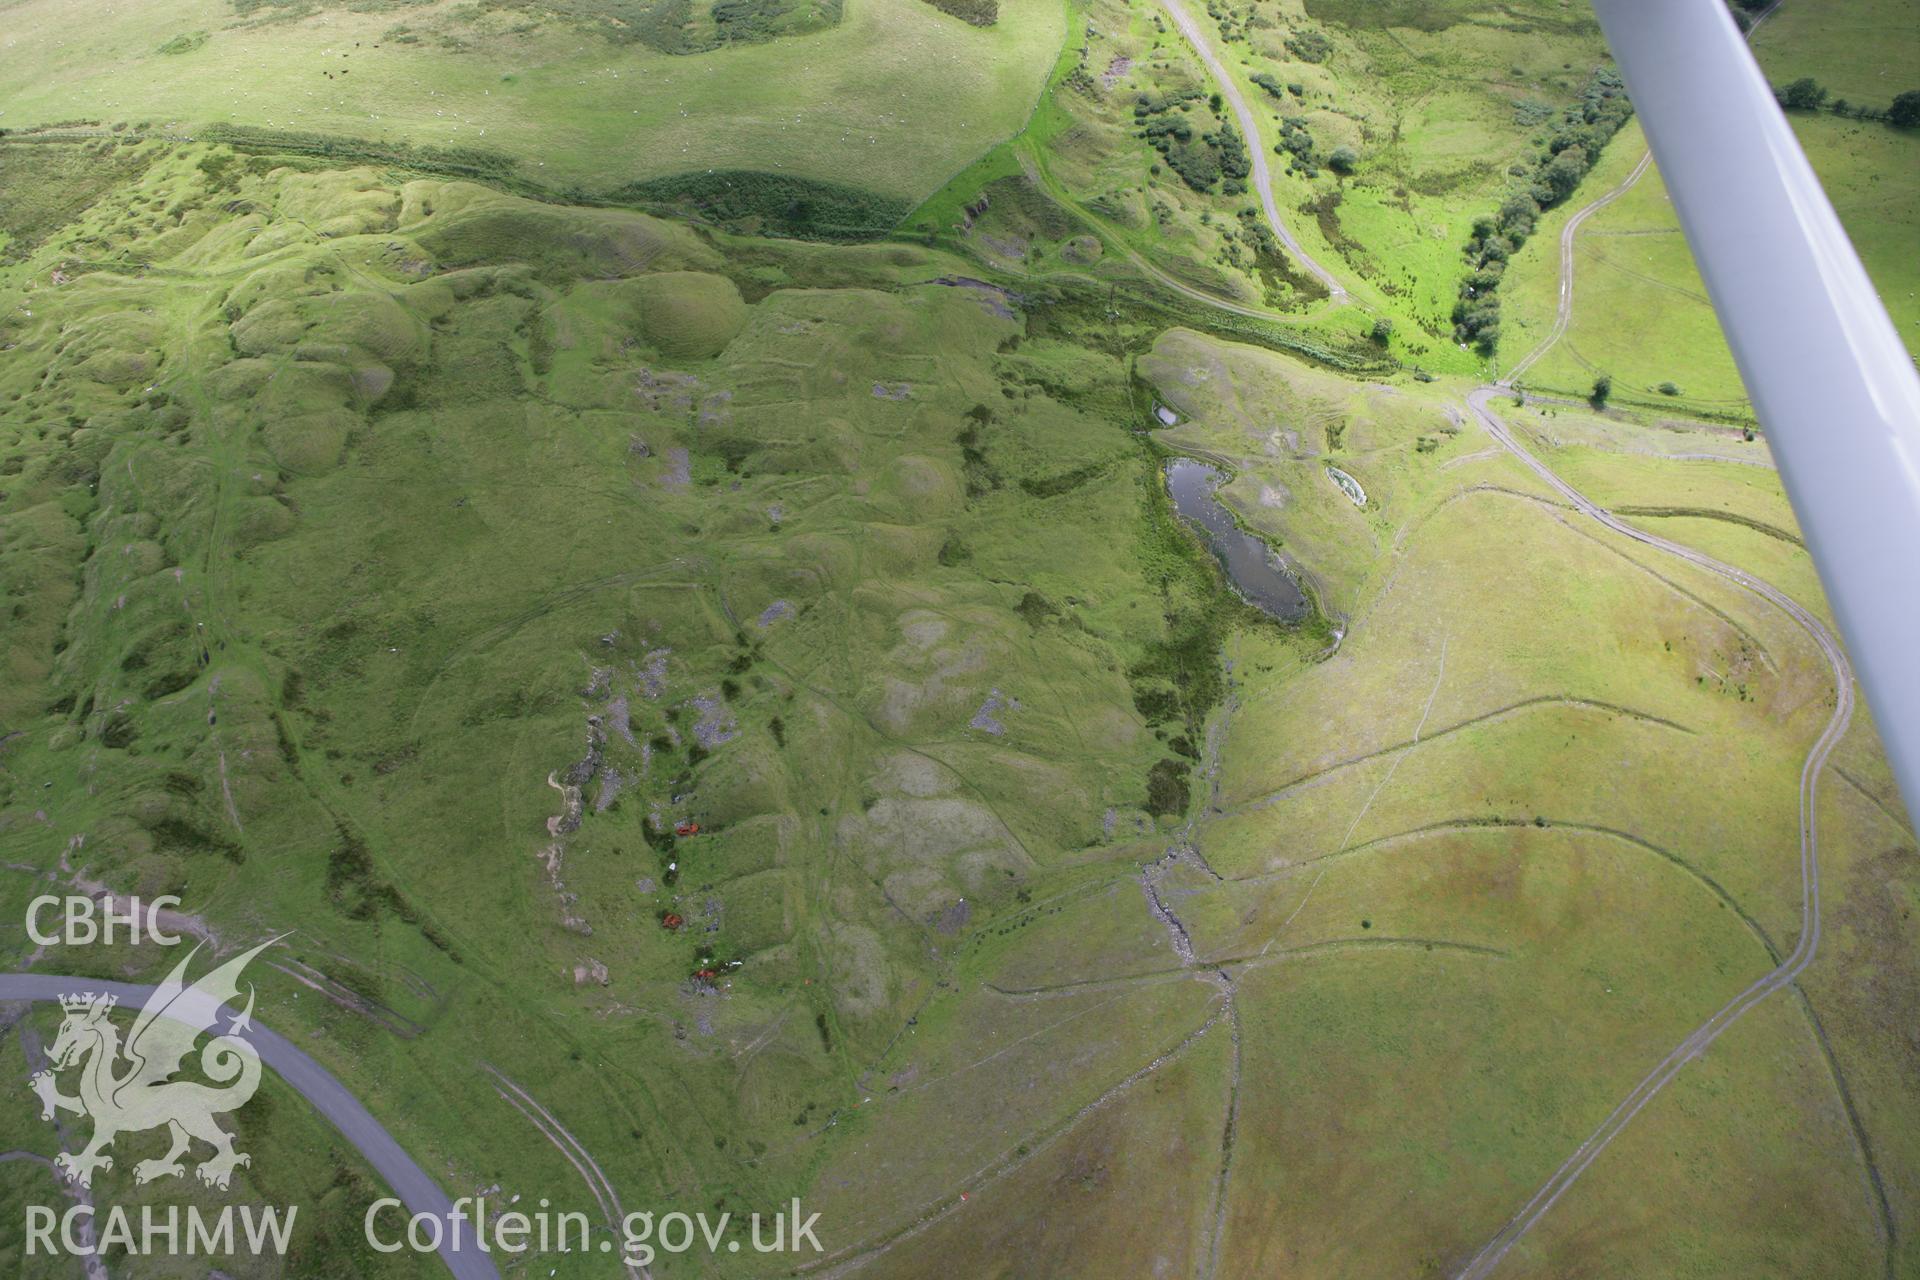 RCAHMW colour oblique aerial photograph of the deserted Ffos y Fran Ironstone Workers Settlement. Taken on 30 July 2007 by Toby Driver